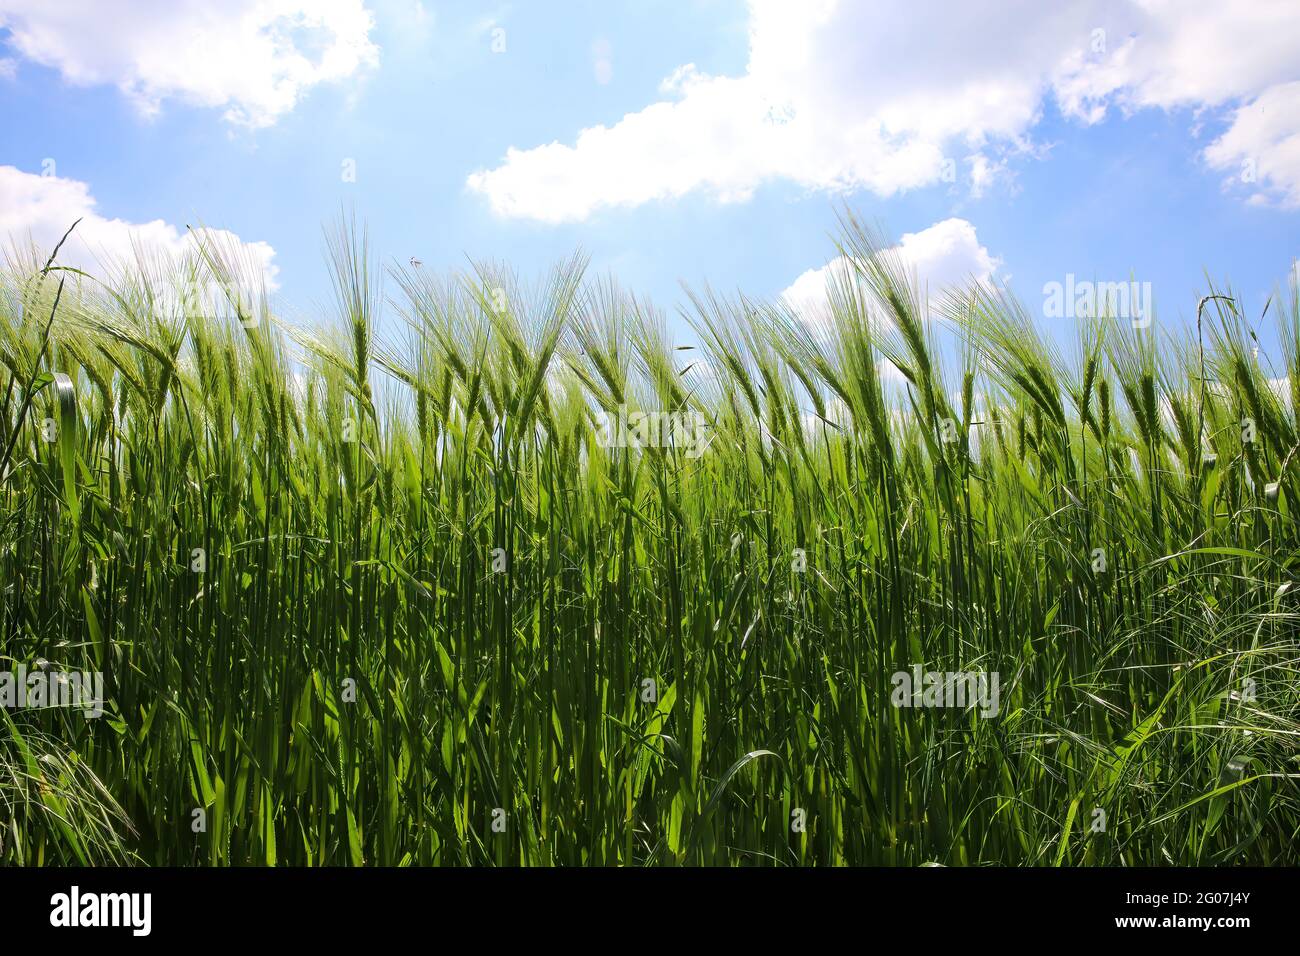 Worm eye view on field with young green common wheat (triticum aestivum) against blue sky with cumulus clouds in springtime Stock Photo